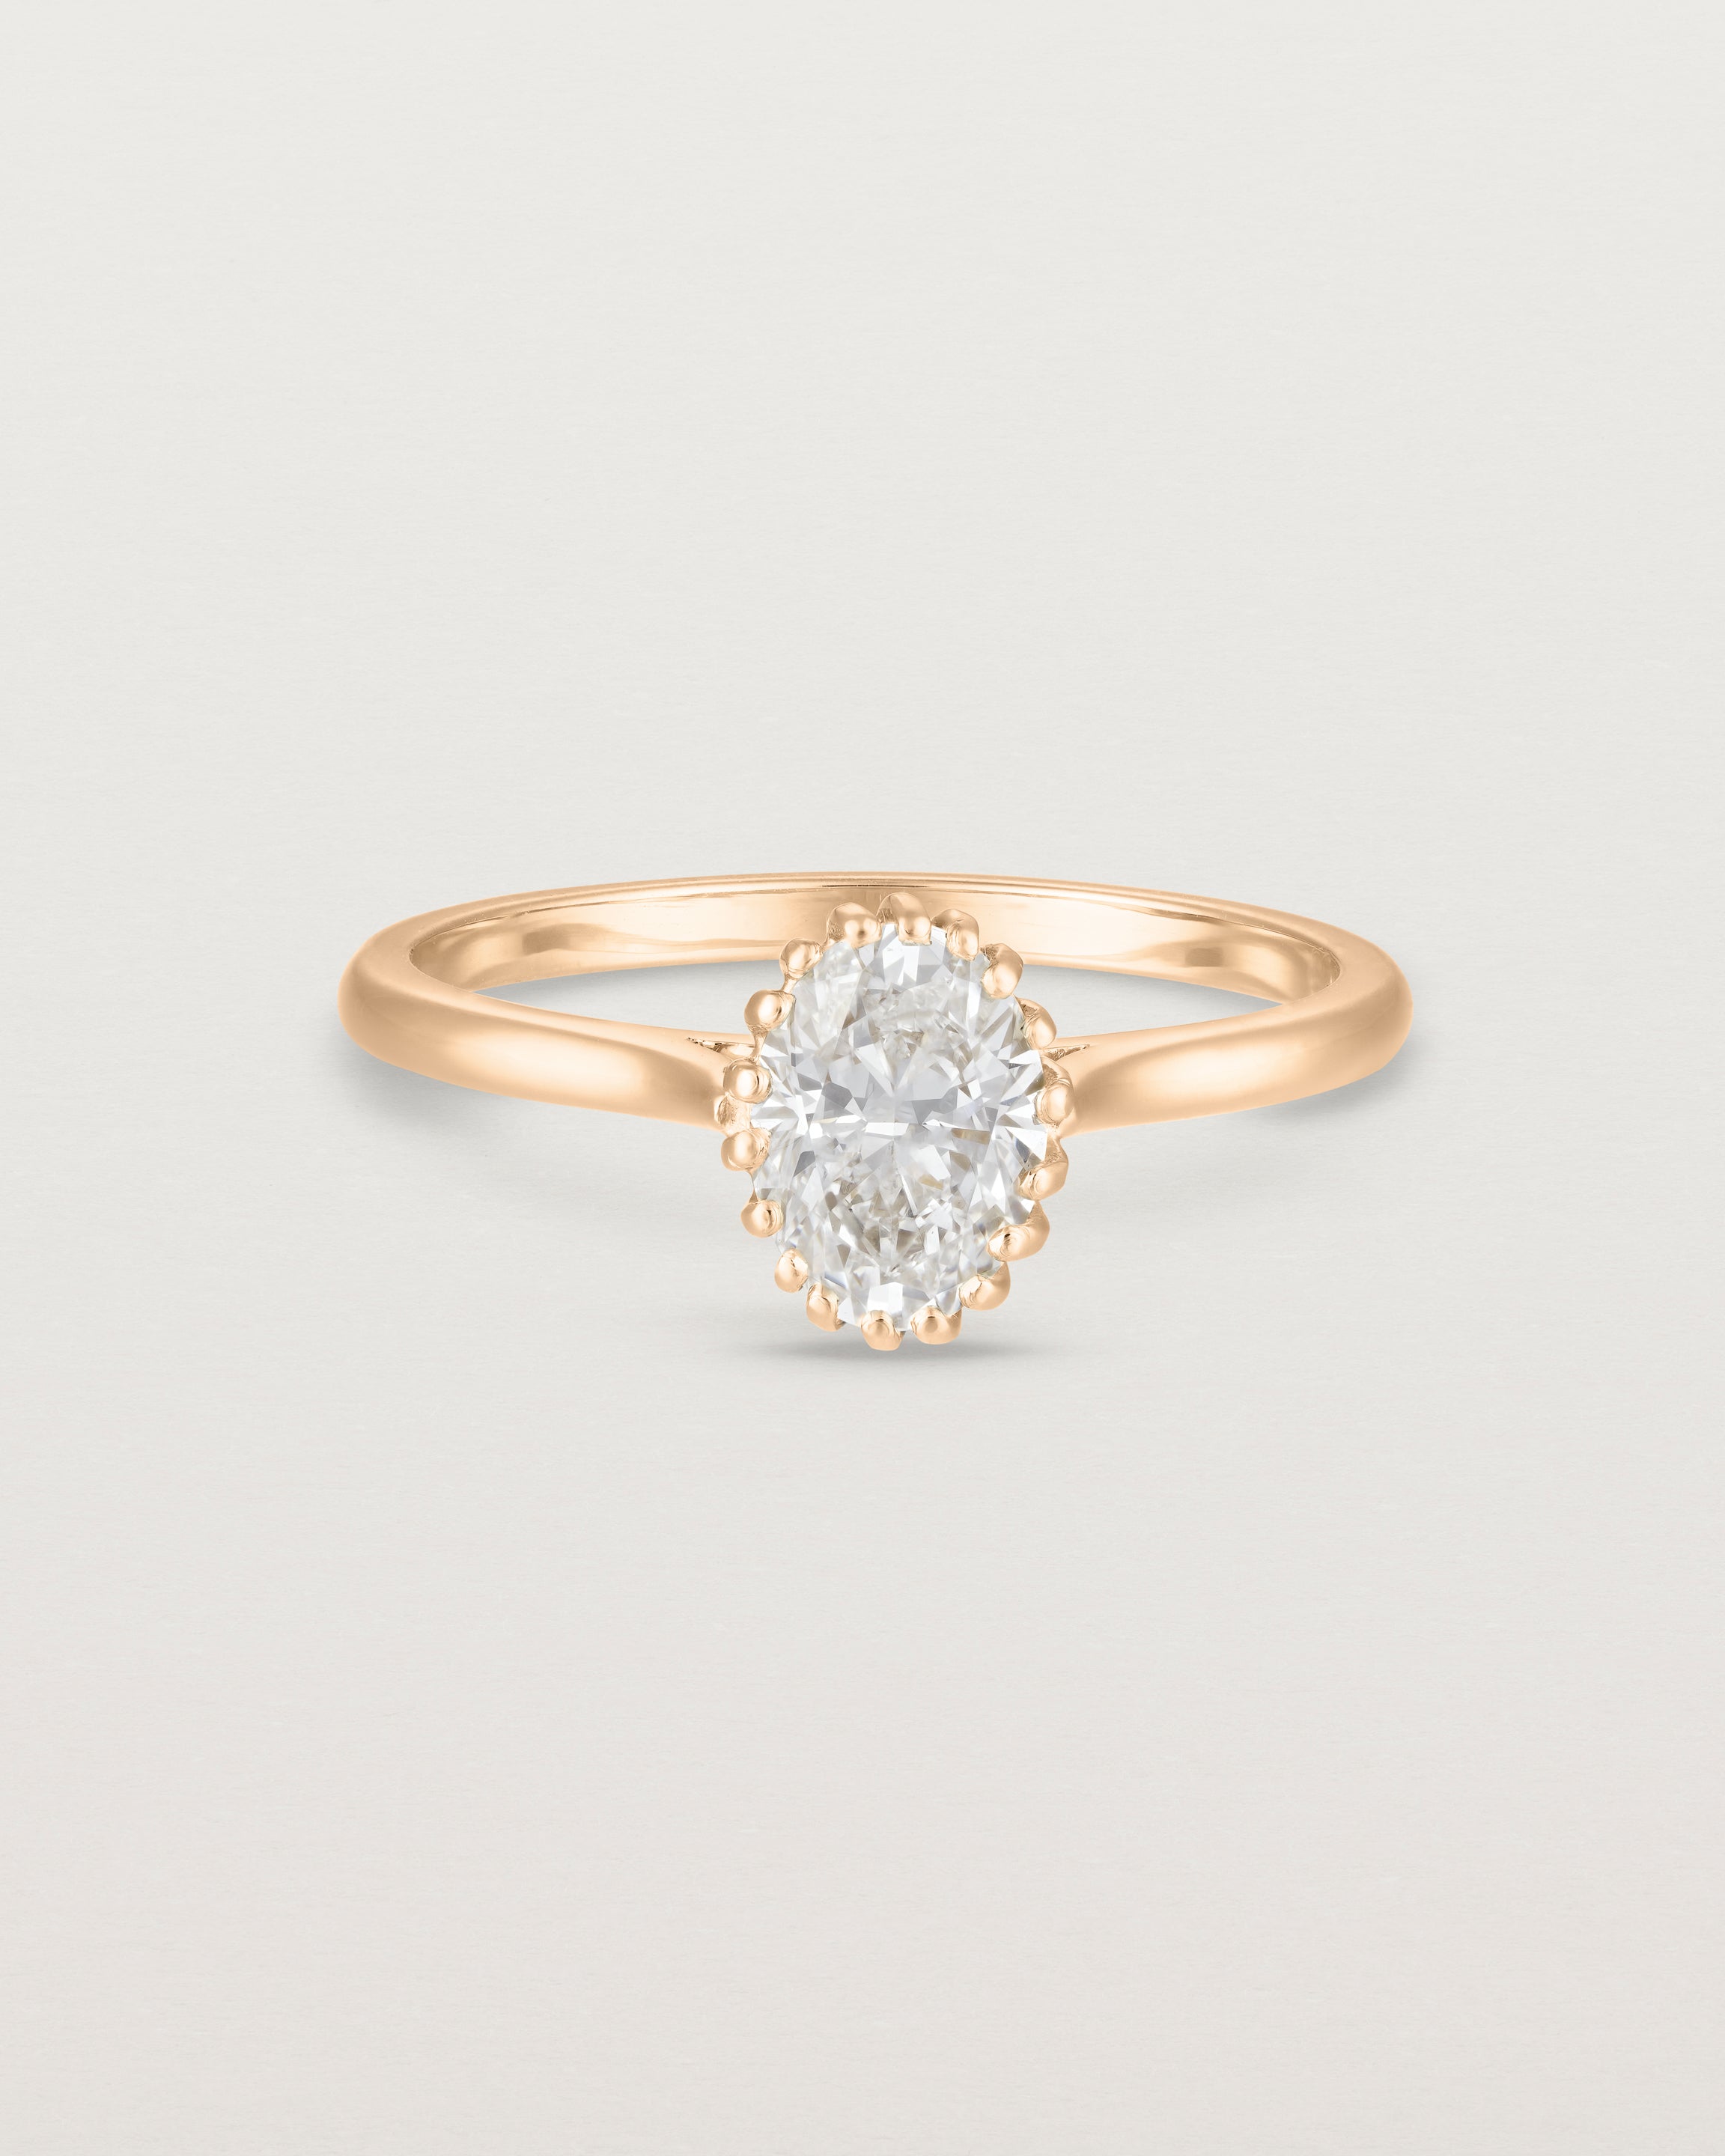 Front view of the Meroë Oval Solitaire | Laboratory Grown Diamond in rose gold.